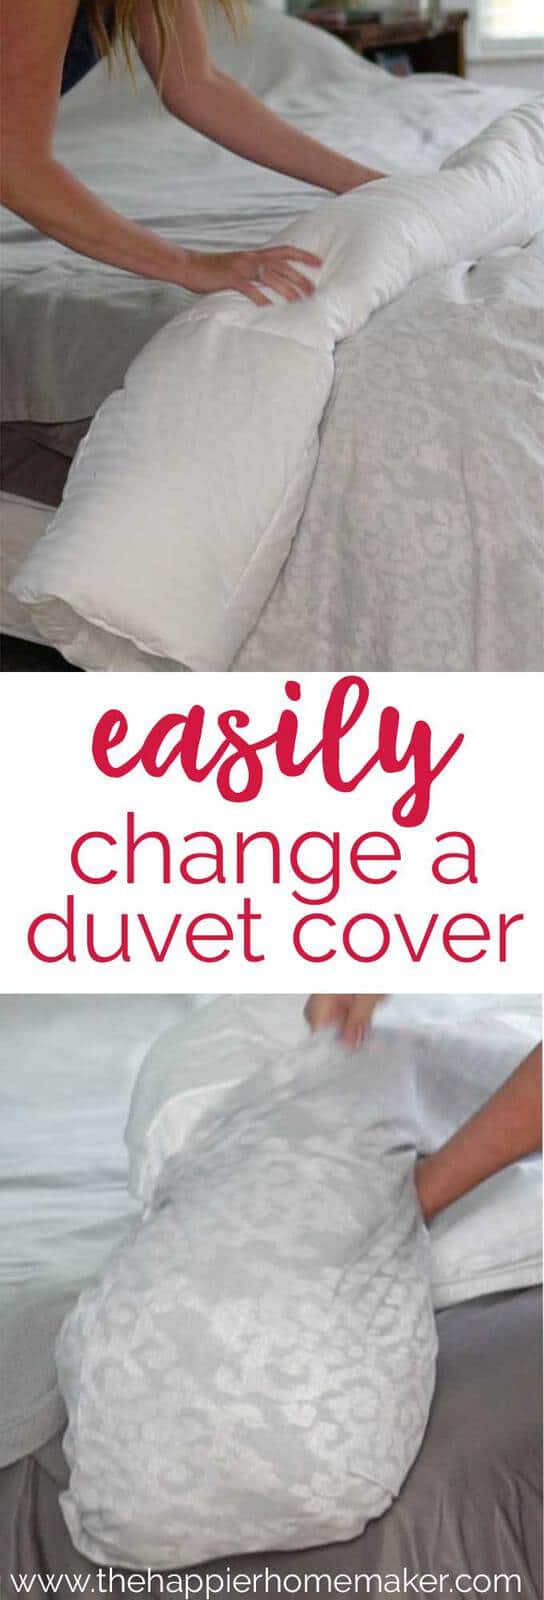 How to Easily Change a Duvet Cover